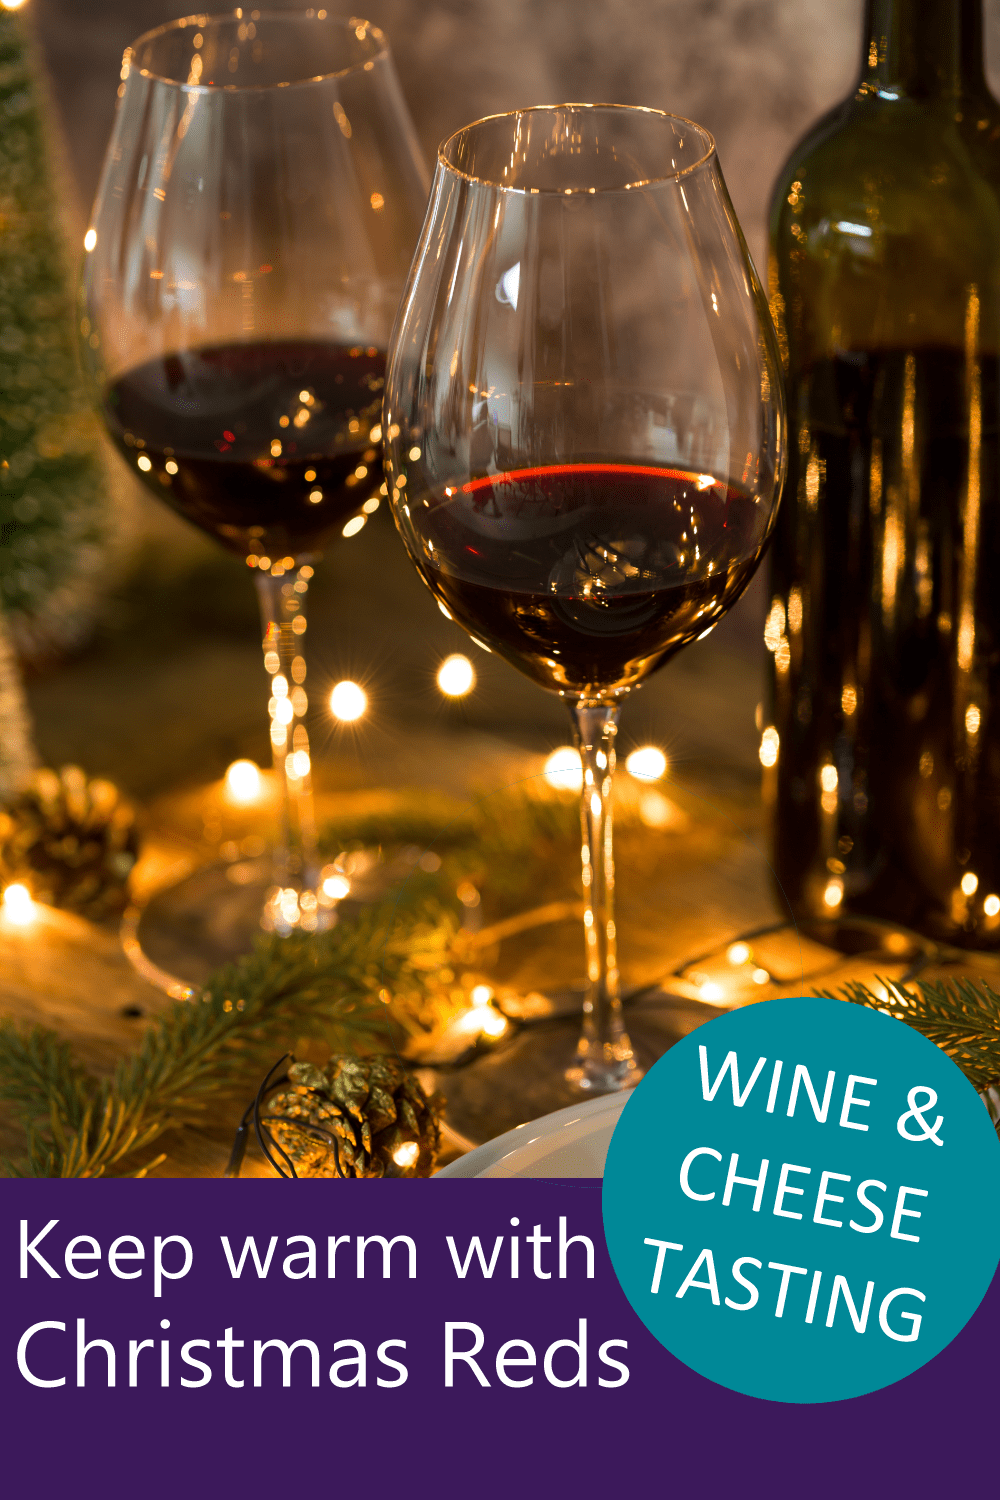 Novel Wines Event Christmas Reds paired with cheeses at Novel Wines shop in Bath, Saturday 16th December at 7pm